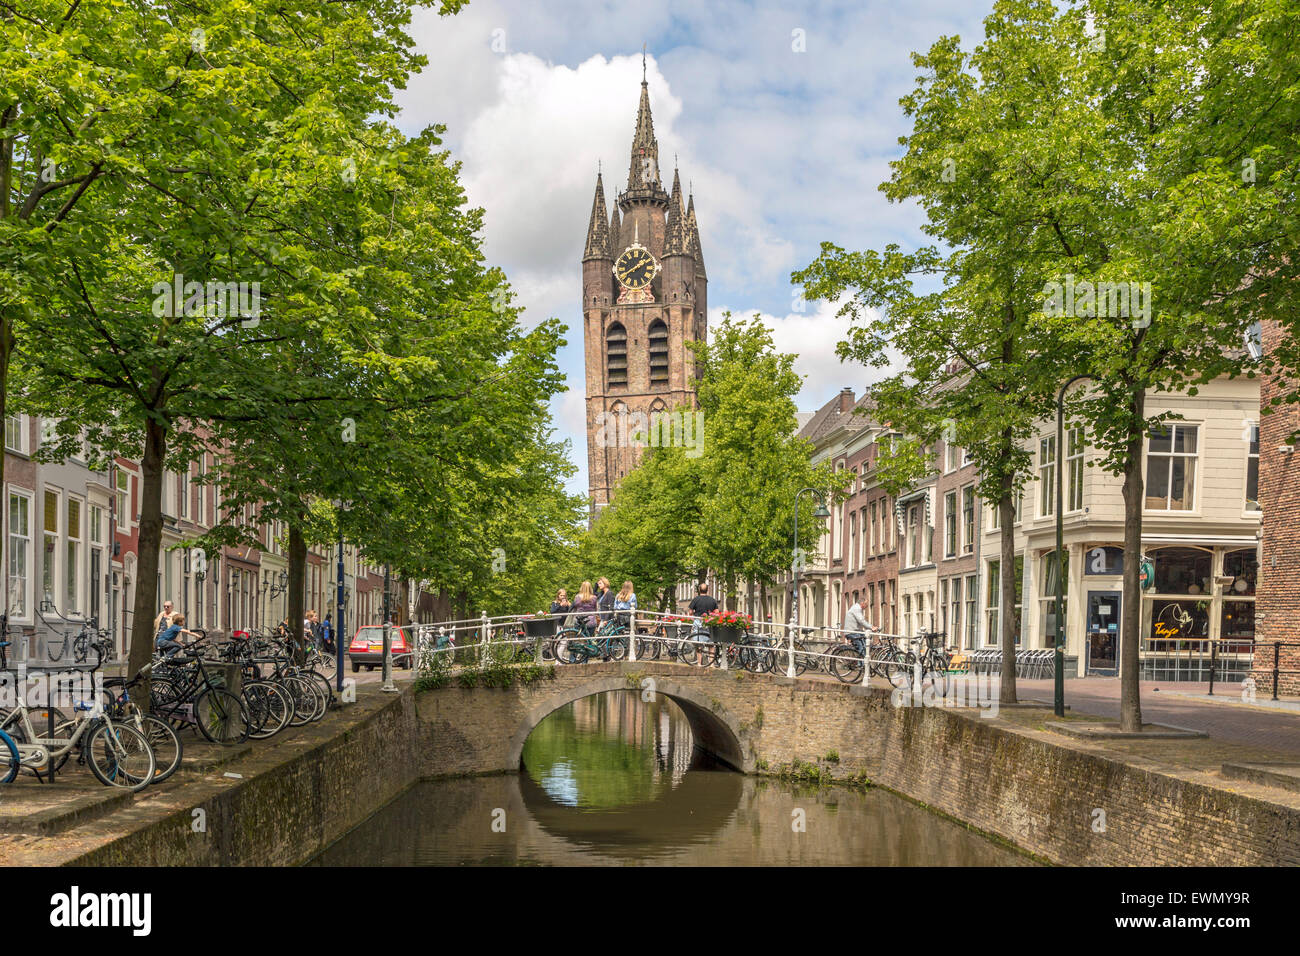 View on The Old Church ( Oude Kerk ) in Delft, which has a sagging tower, dating back to 1246, South Holland, The Netherlands. Stock Photo